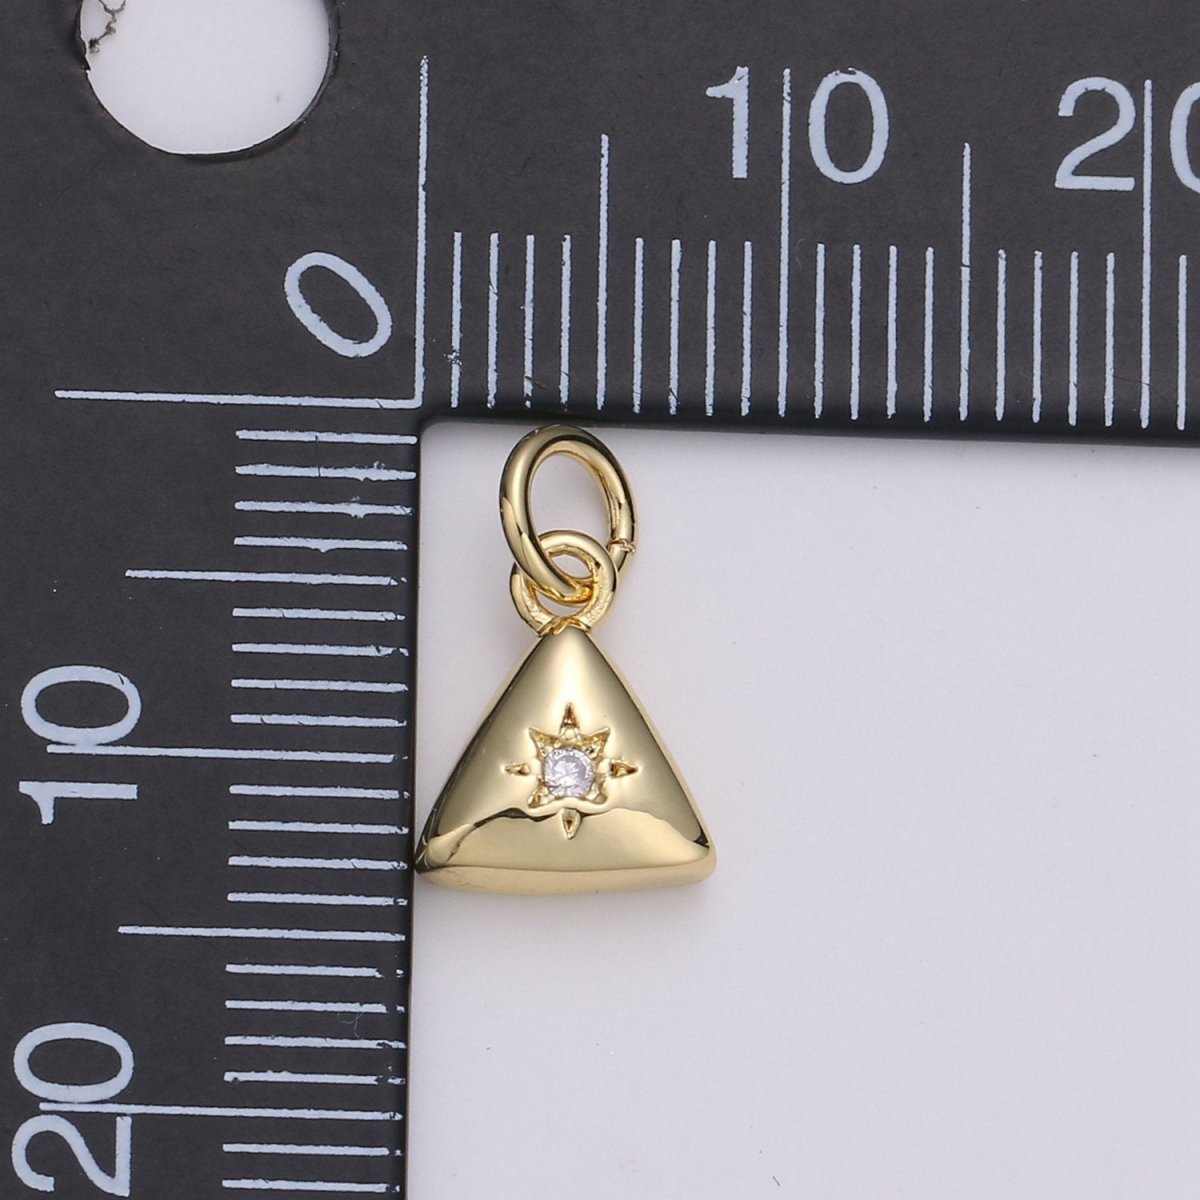 Dainty 14k Gold Filled North Star Charm Cubic Zirconia Triangle Pendant in Gold micro Pave CZ North Star Pendant Jewelry Making, D-421 D-422 - DLUXCA